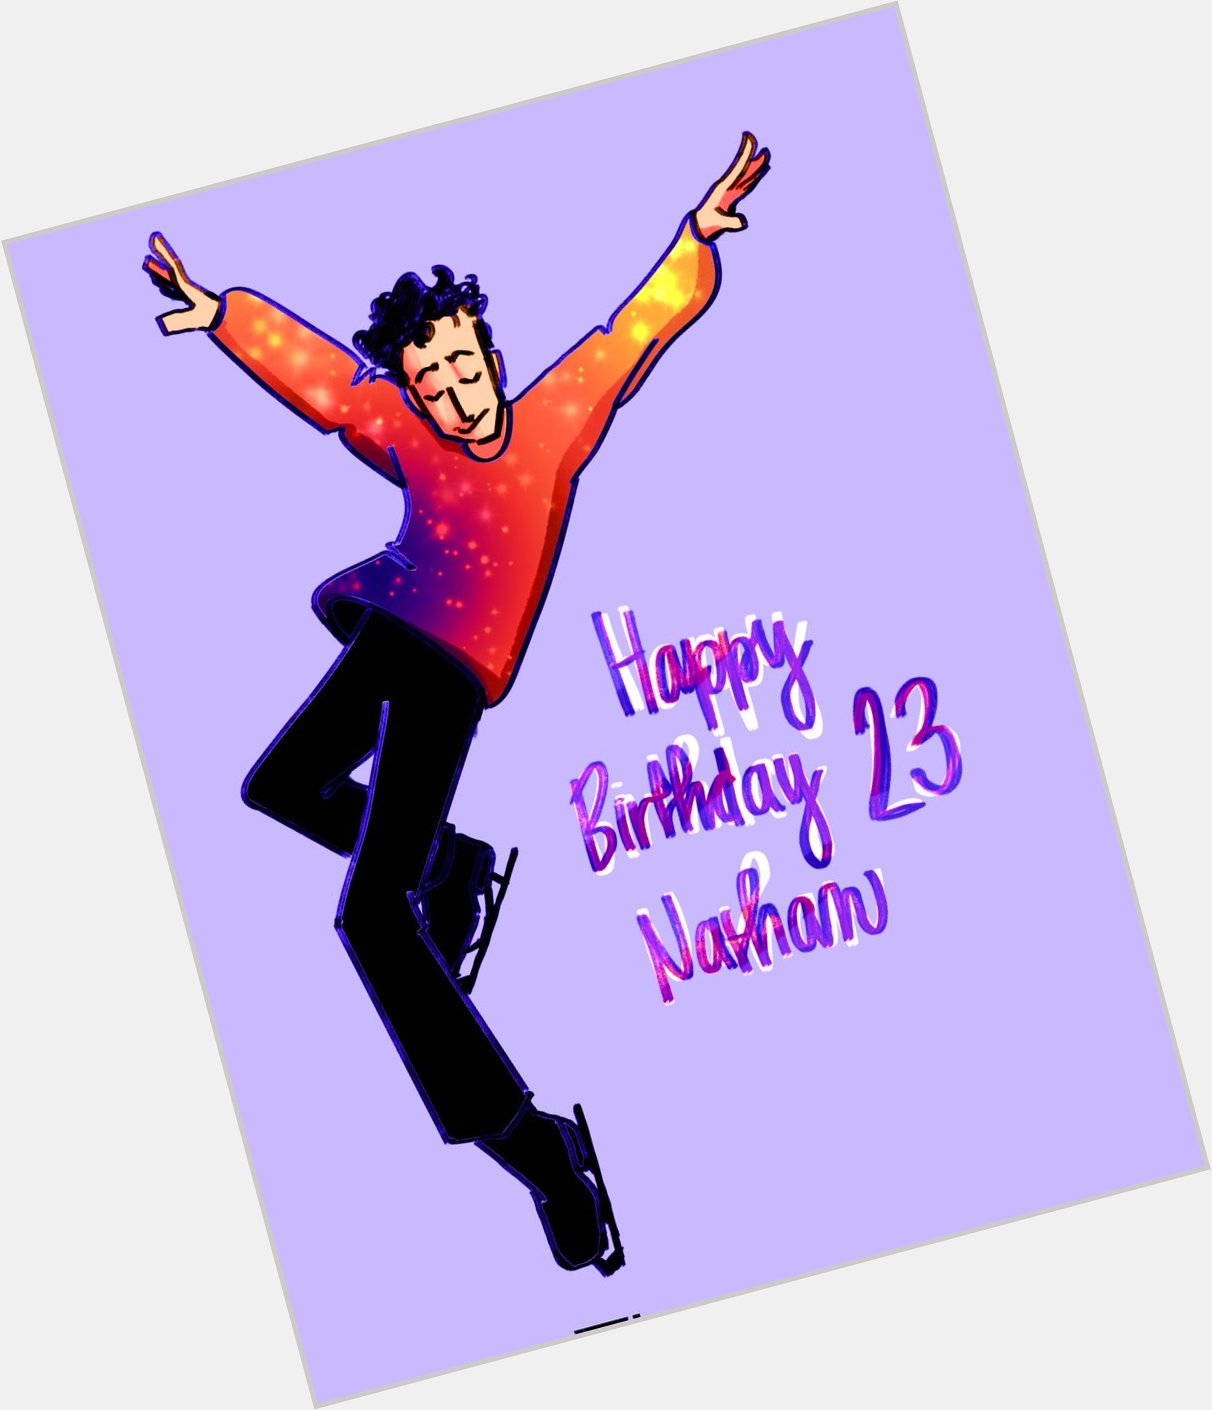 Happy birthday to one of my favourite figure skaters, nathan chen  